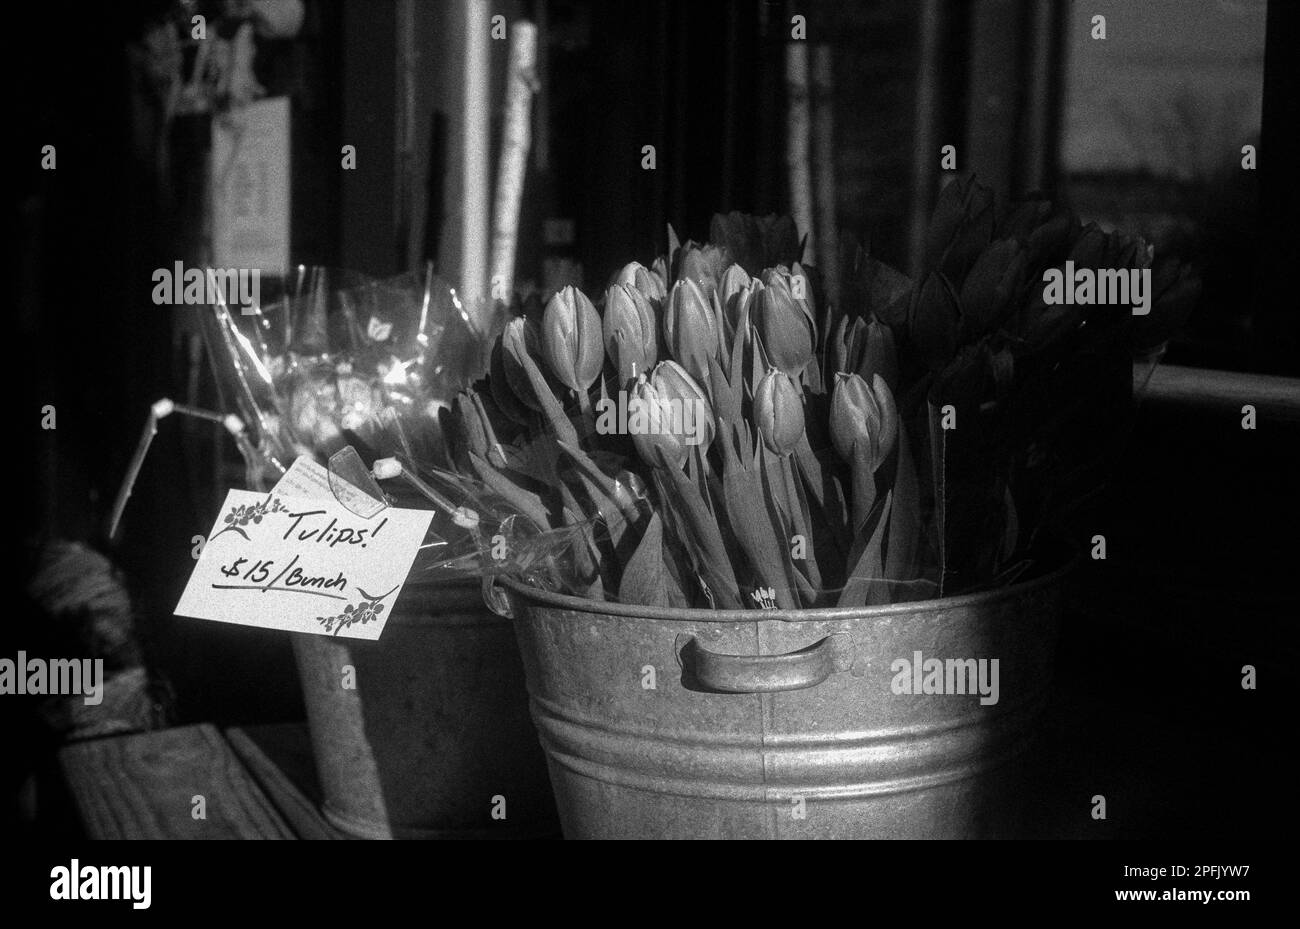 A bucket of tulips on display on the street in front of a florist shop awaiting Valentines Day shoppers in Melrose, Massachusetts. The image was captu Stock Photo